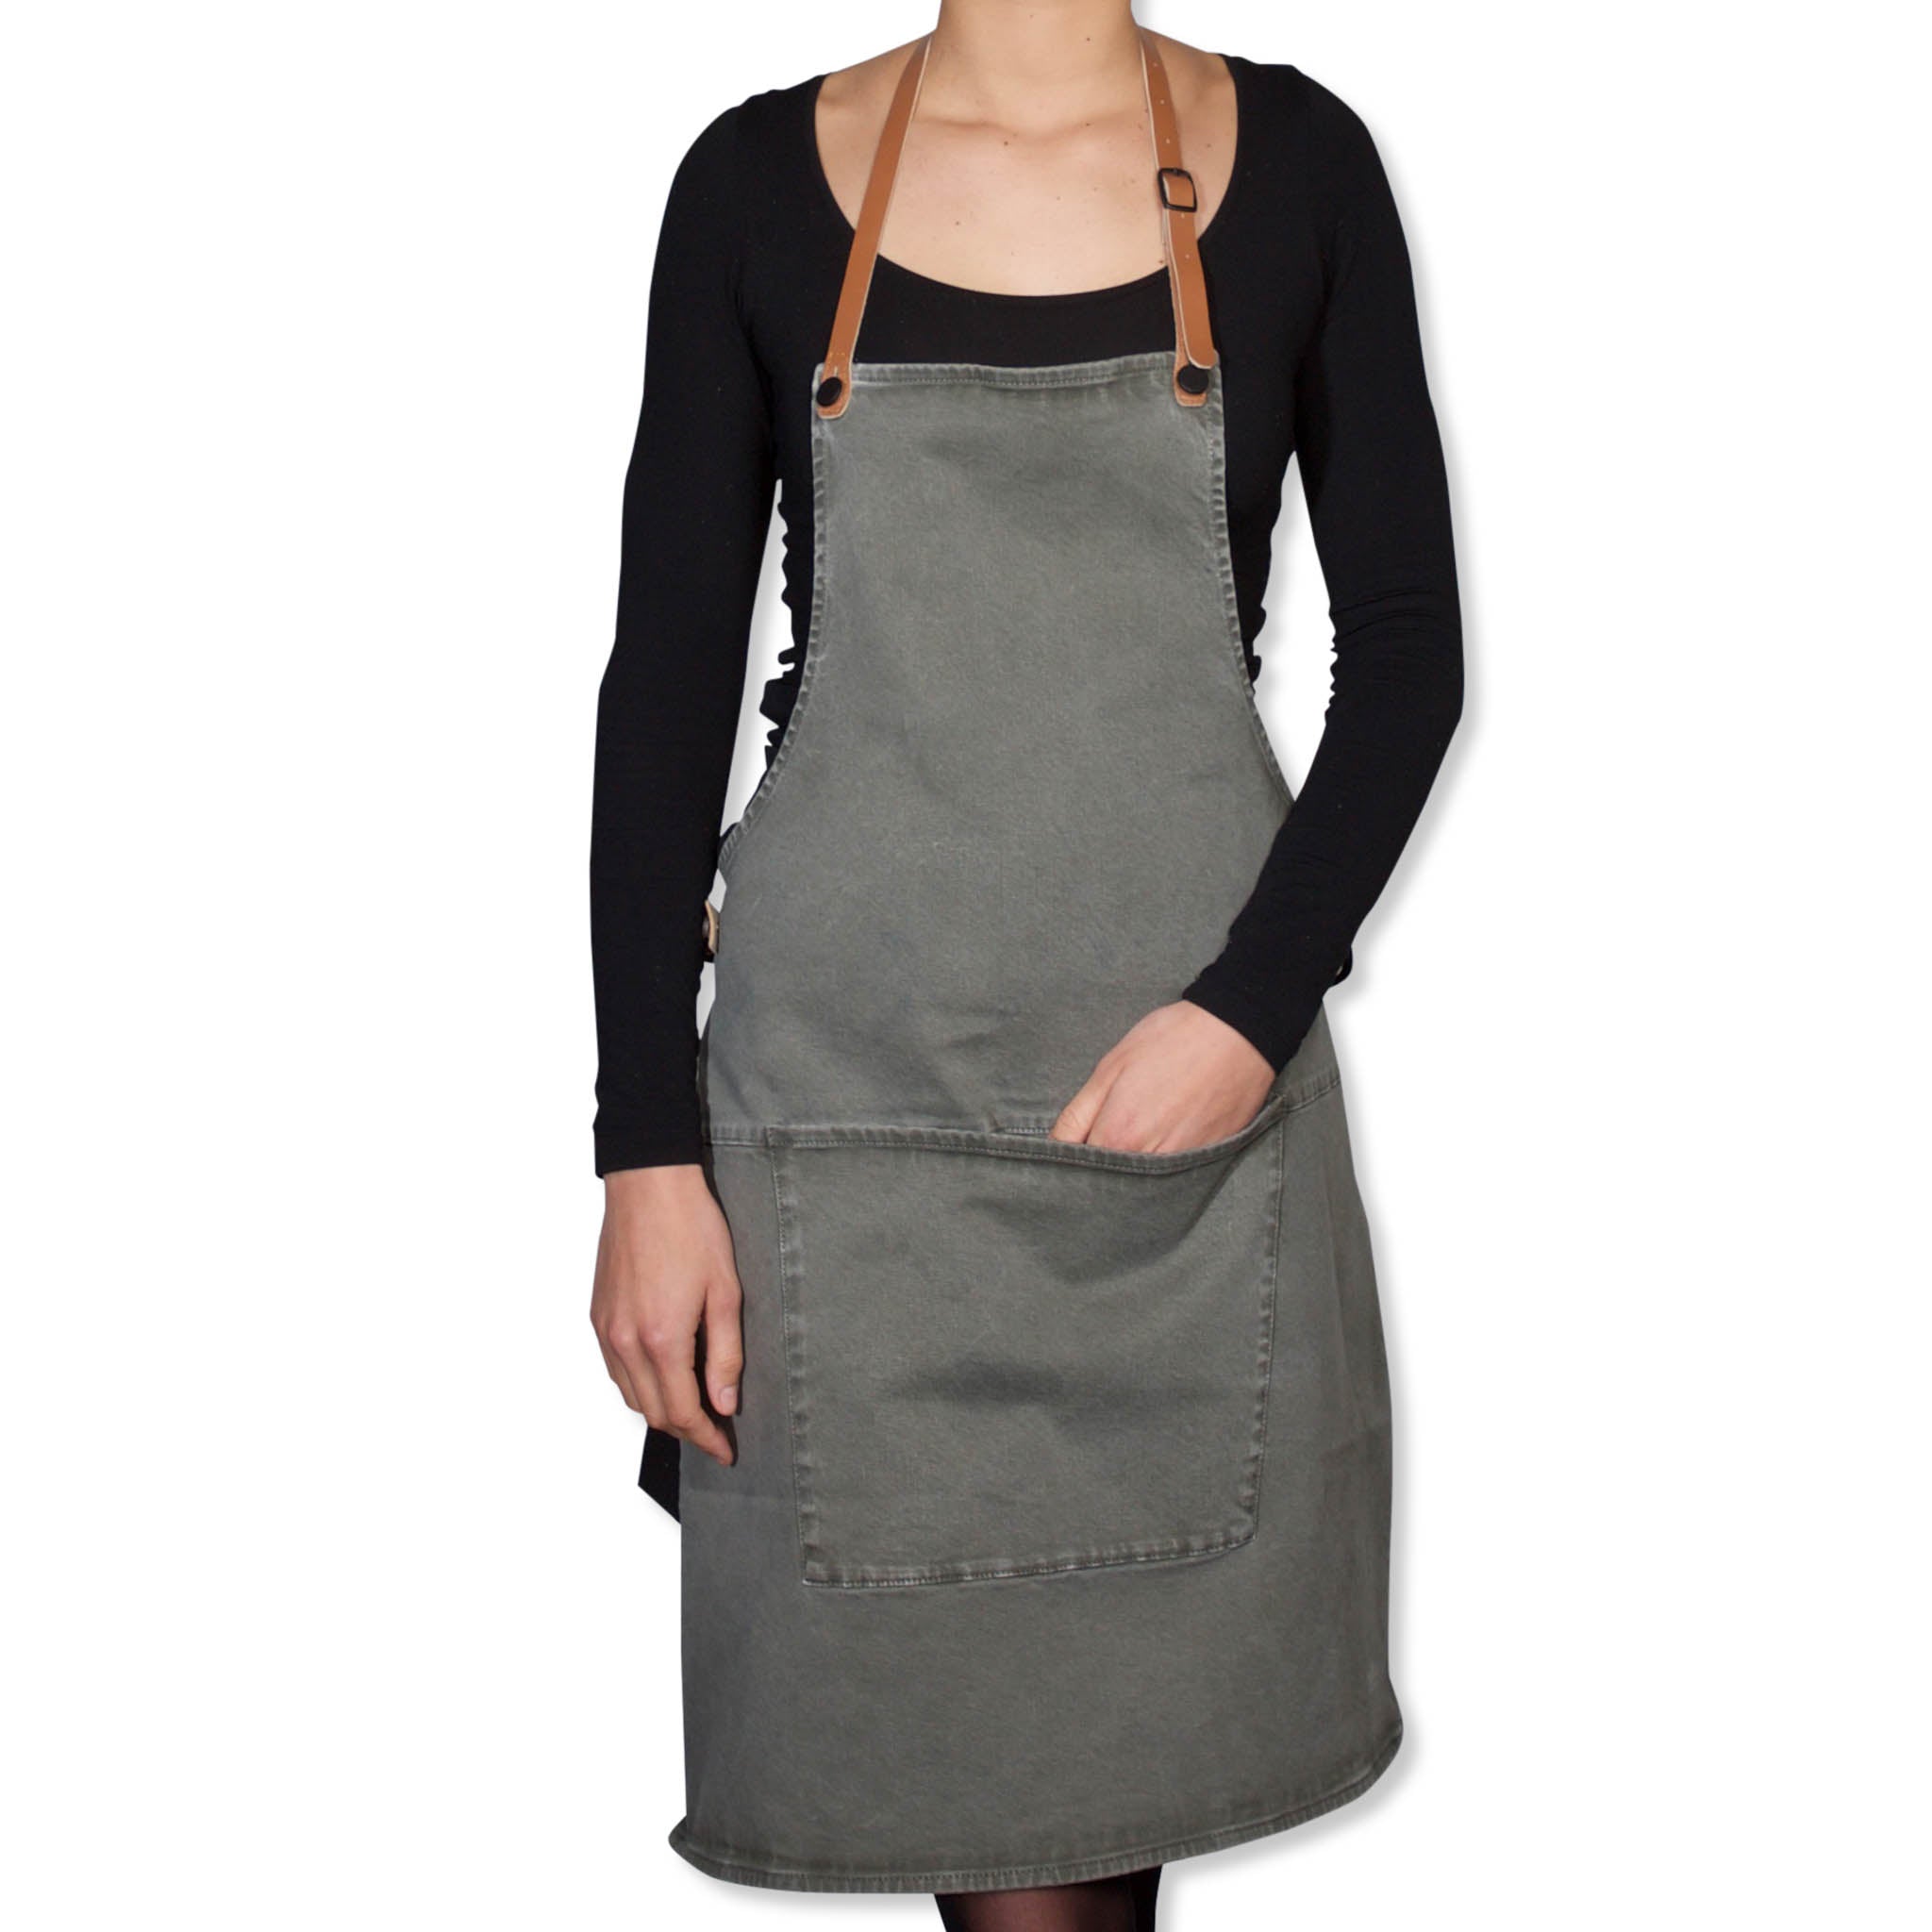 Dutchdeluxes Canvas BBQ Apron in Grey-Green Cookware Kitchen Clothing